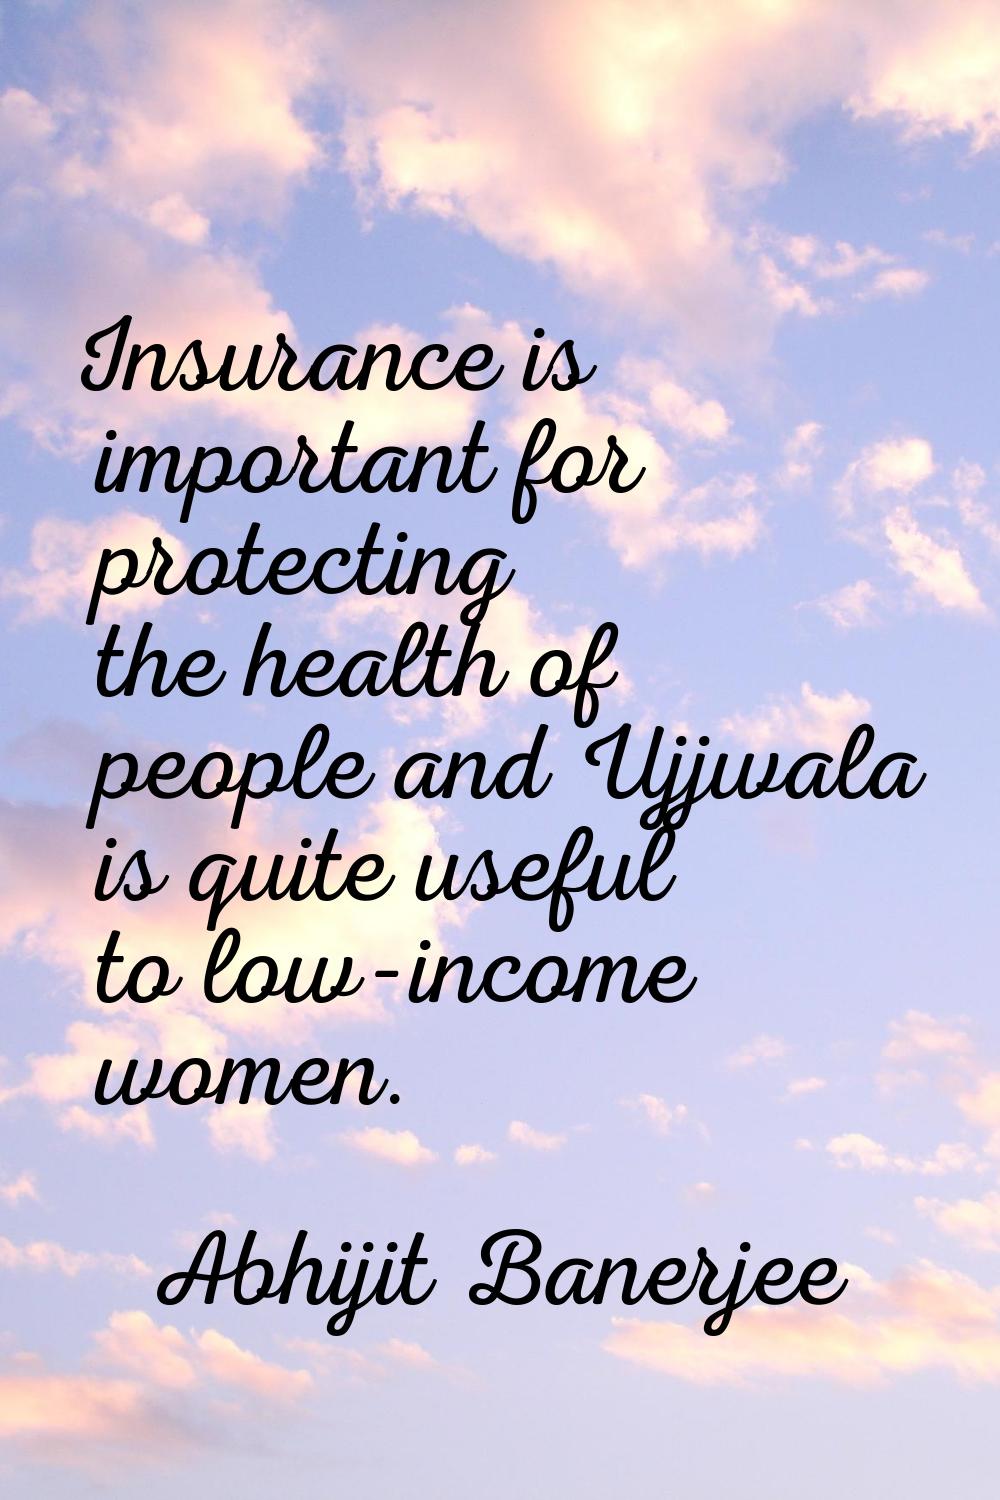 Insurance is important for protecting the health of people and Ujjwala is quite useful to low-incom